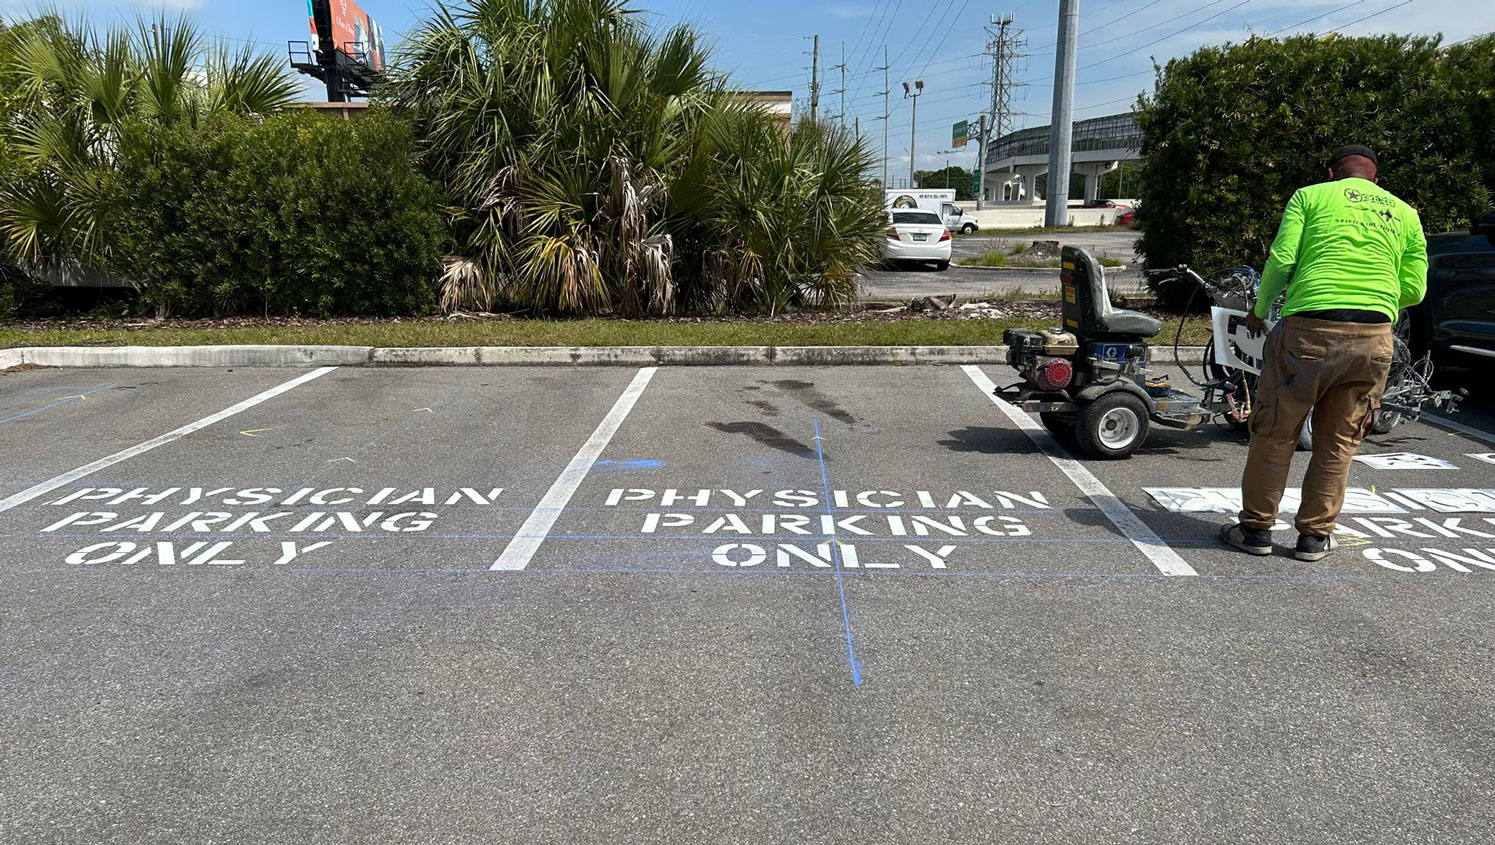 thermoplastic pavement striping in St. Petersburg, FL